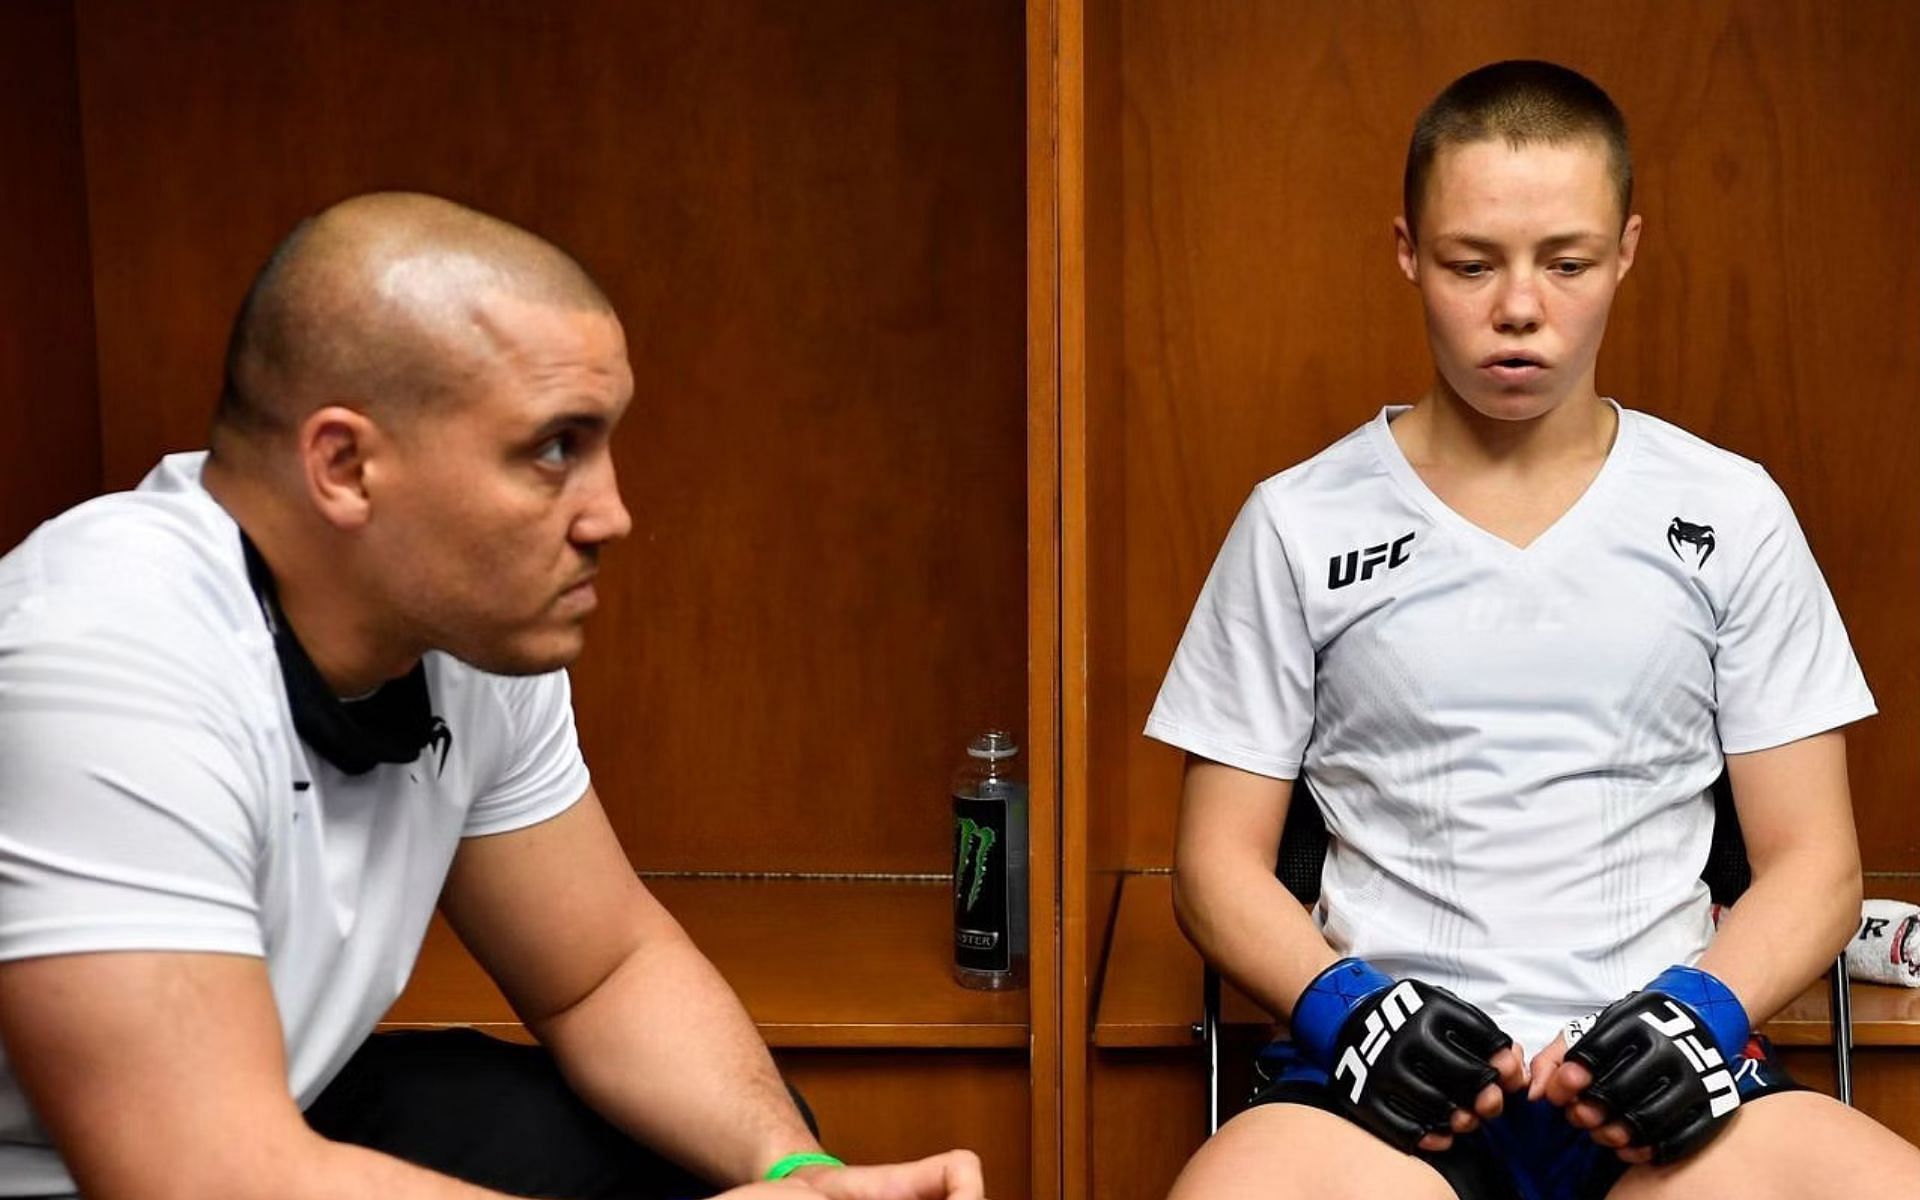 Pat Barry (left) and Rose Namajunas (right) [Image credits: @MMAFighting on Twitter]